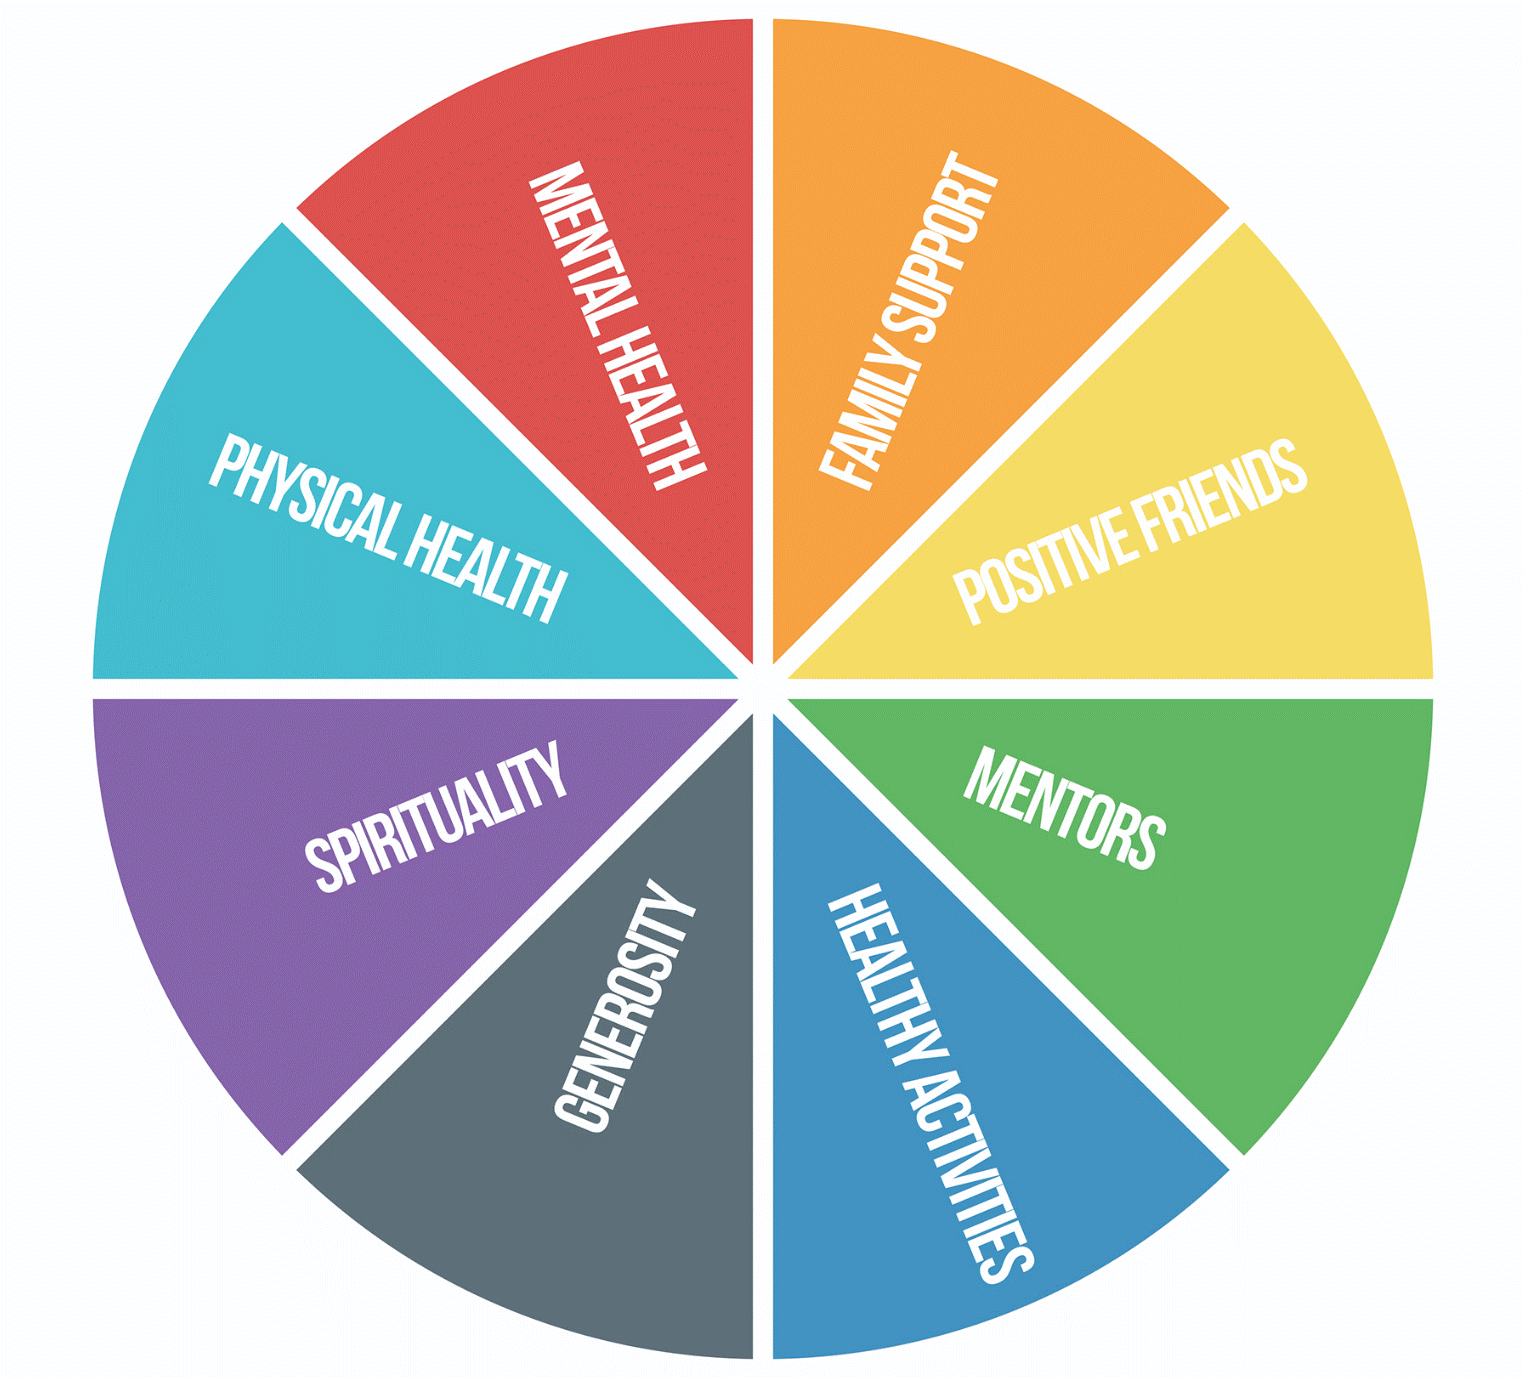 sources of strength wheel